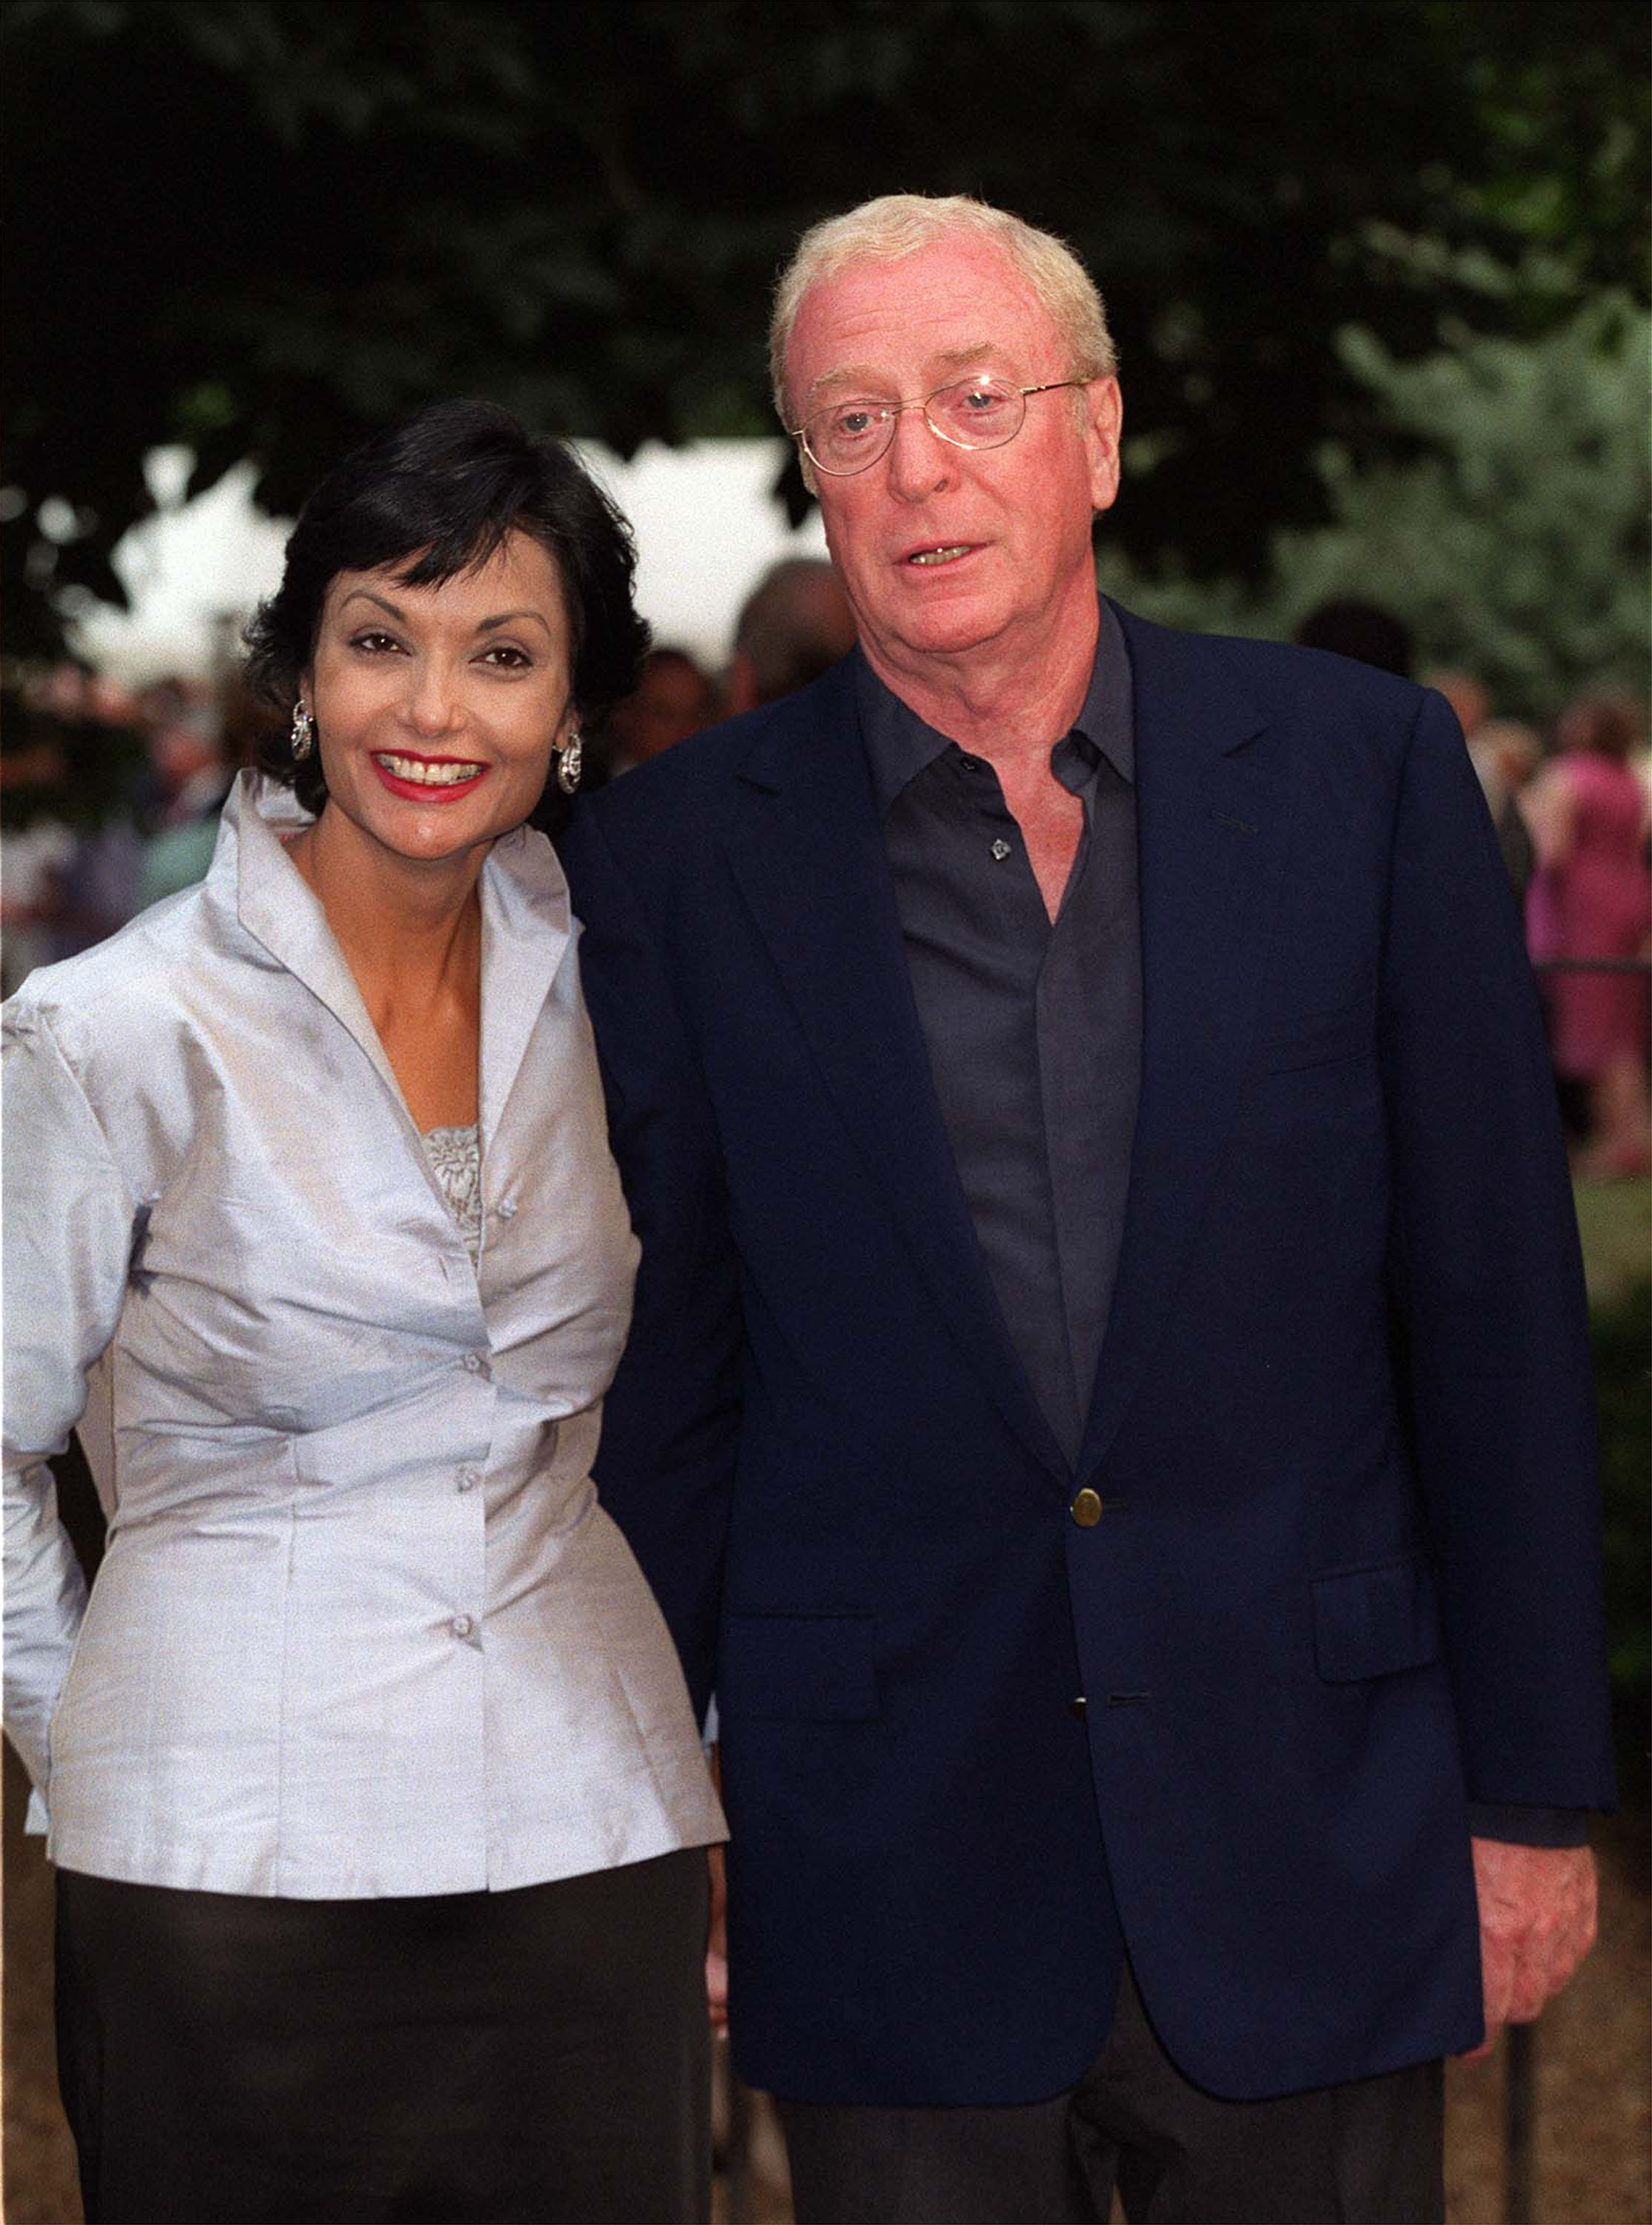 Michael Caine and Shakira Caine at a summer party on July 4, 2001 in Chelsea, London. | Source: Getty Images